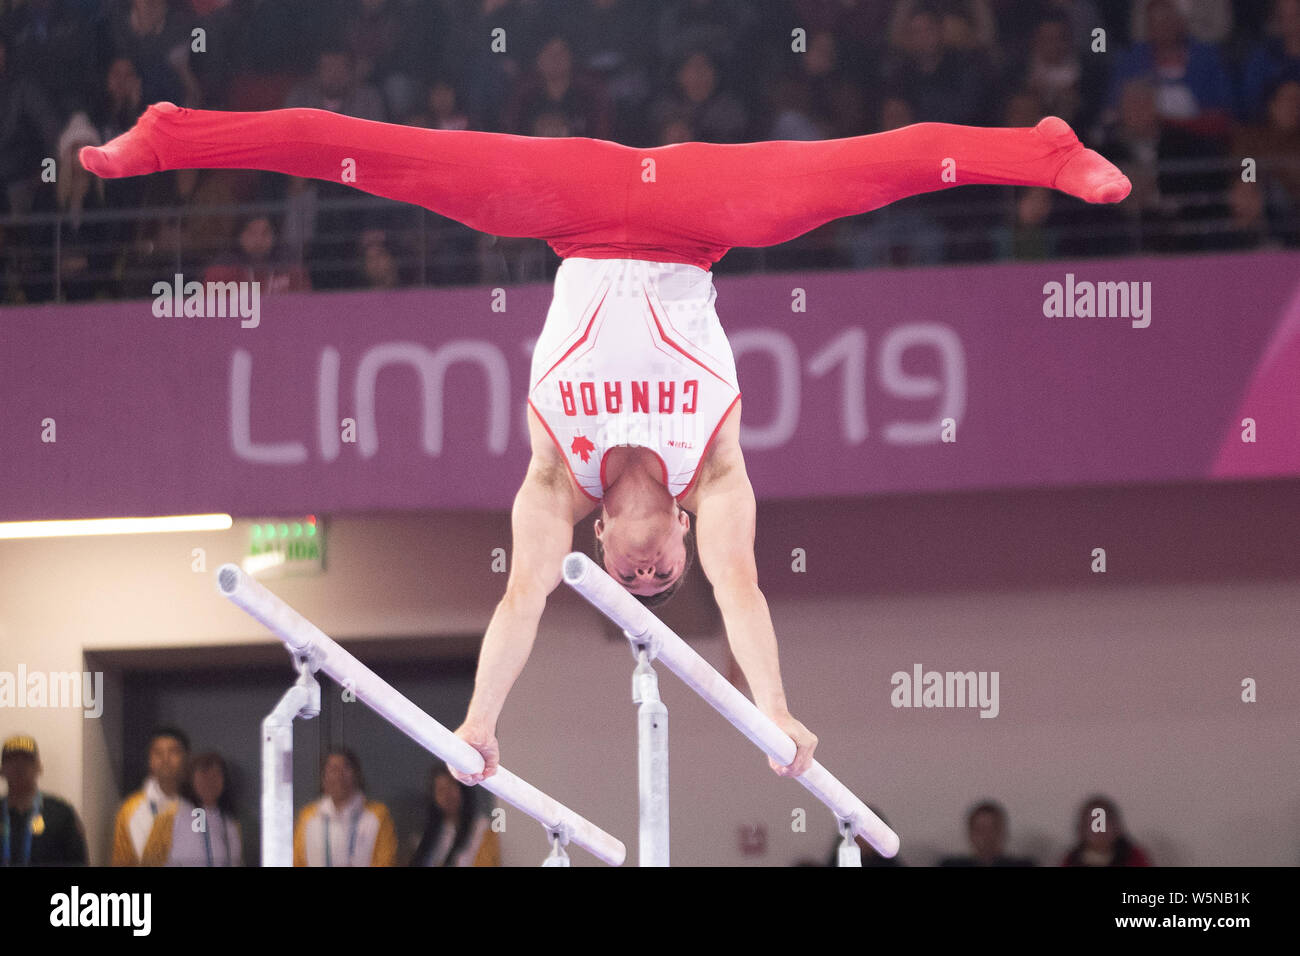 Lima, Peru. 28th July, 2019. Rene Cournoyer (#83) of Canada performs on the parallel bars during the Pan American Games Artistic Gymnastics, Men's Team Qualification and Final at Polideportivo Villa el Salvador in Lima, Peru. Daniel Lea/CSM/Alamy Live News Stock Photo